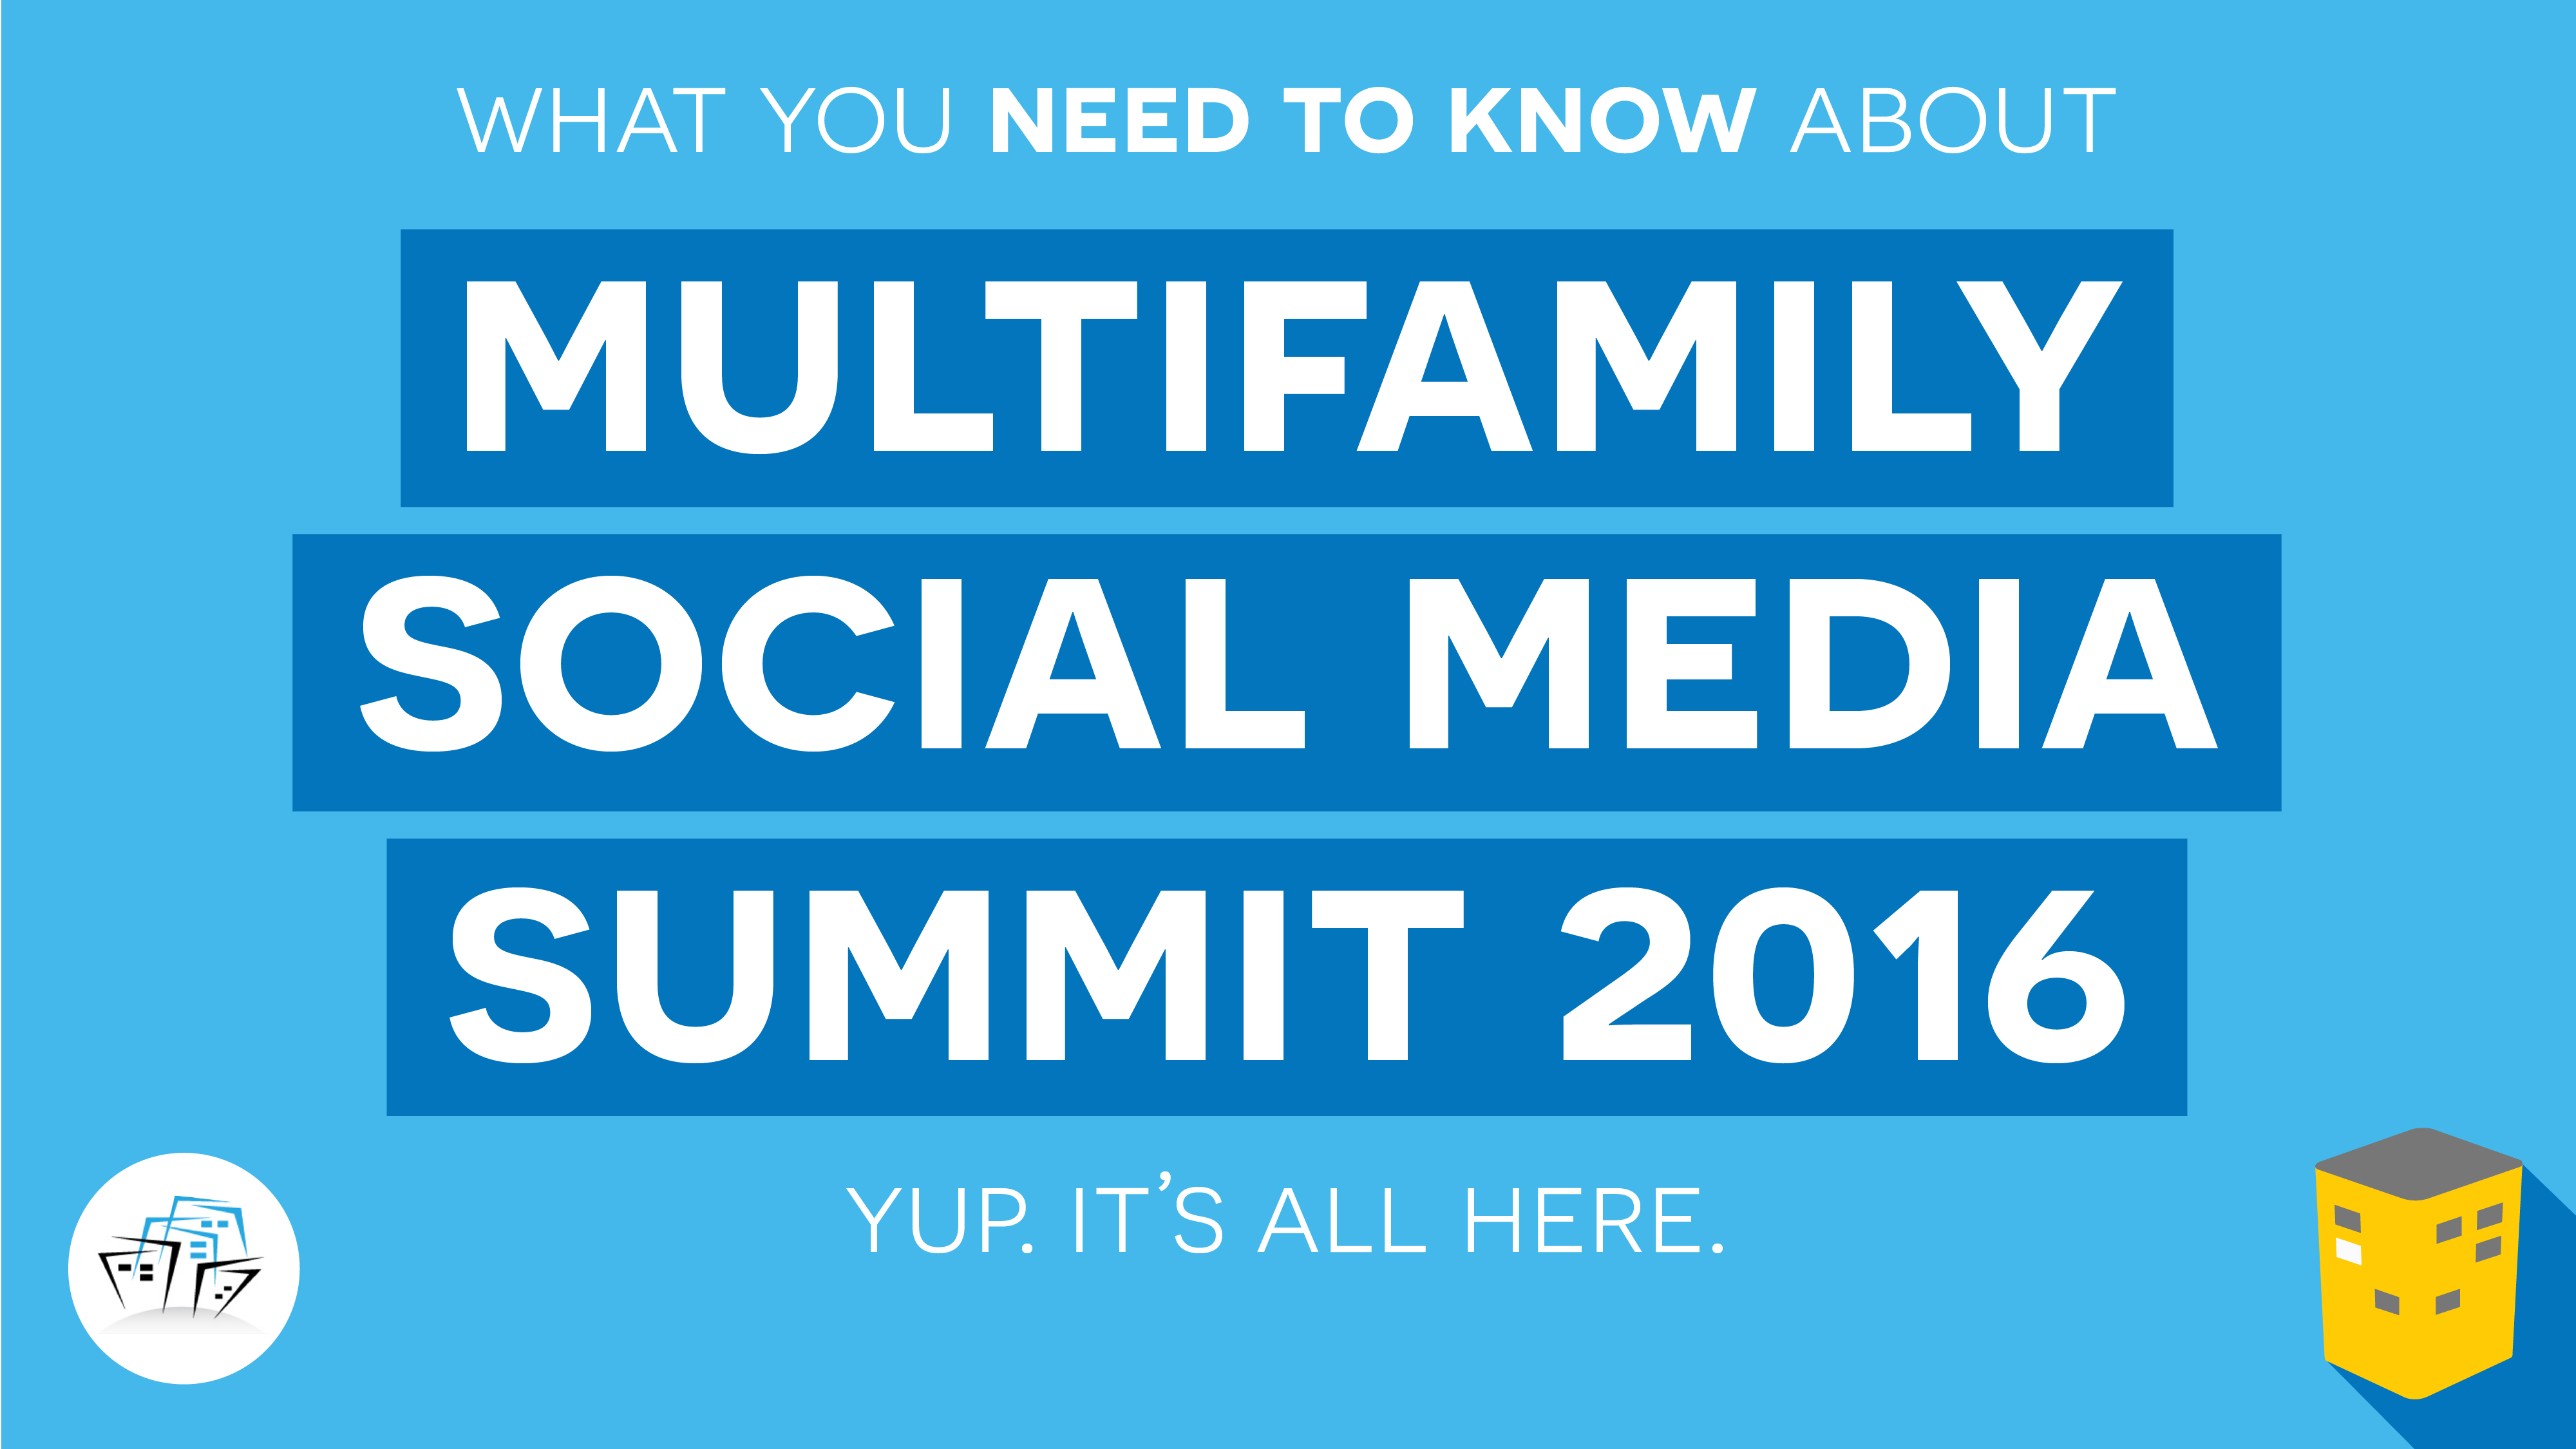 What You Need to Know About Multifamily Social Media Summit 2016